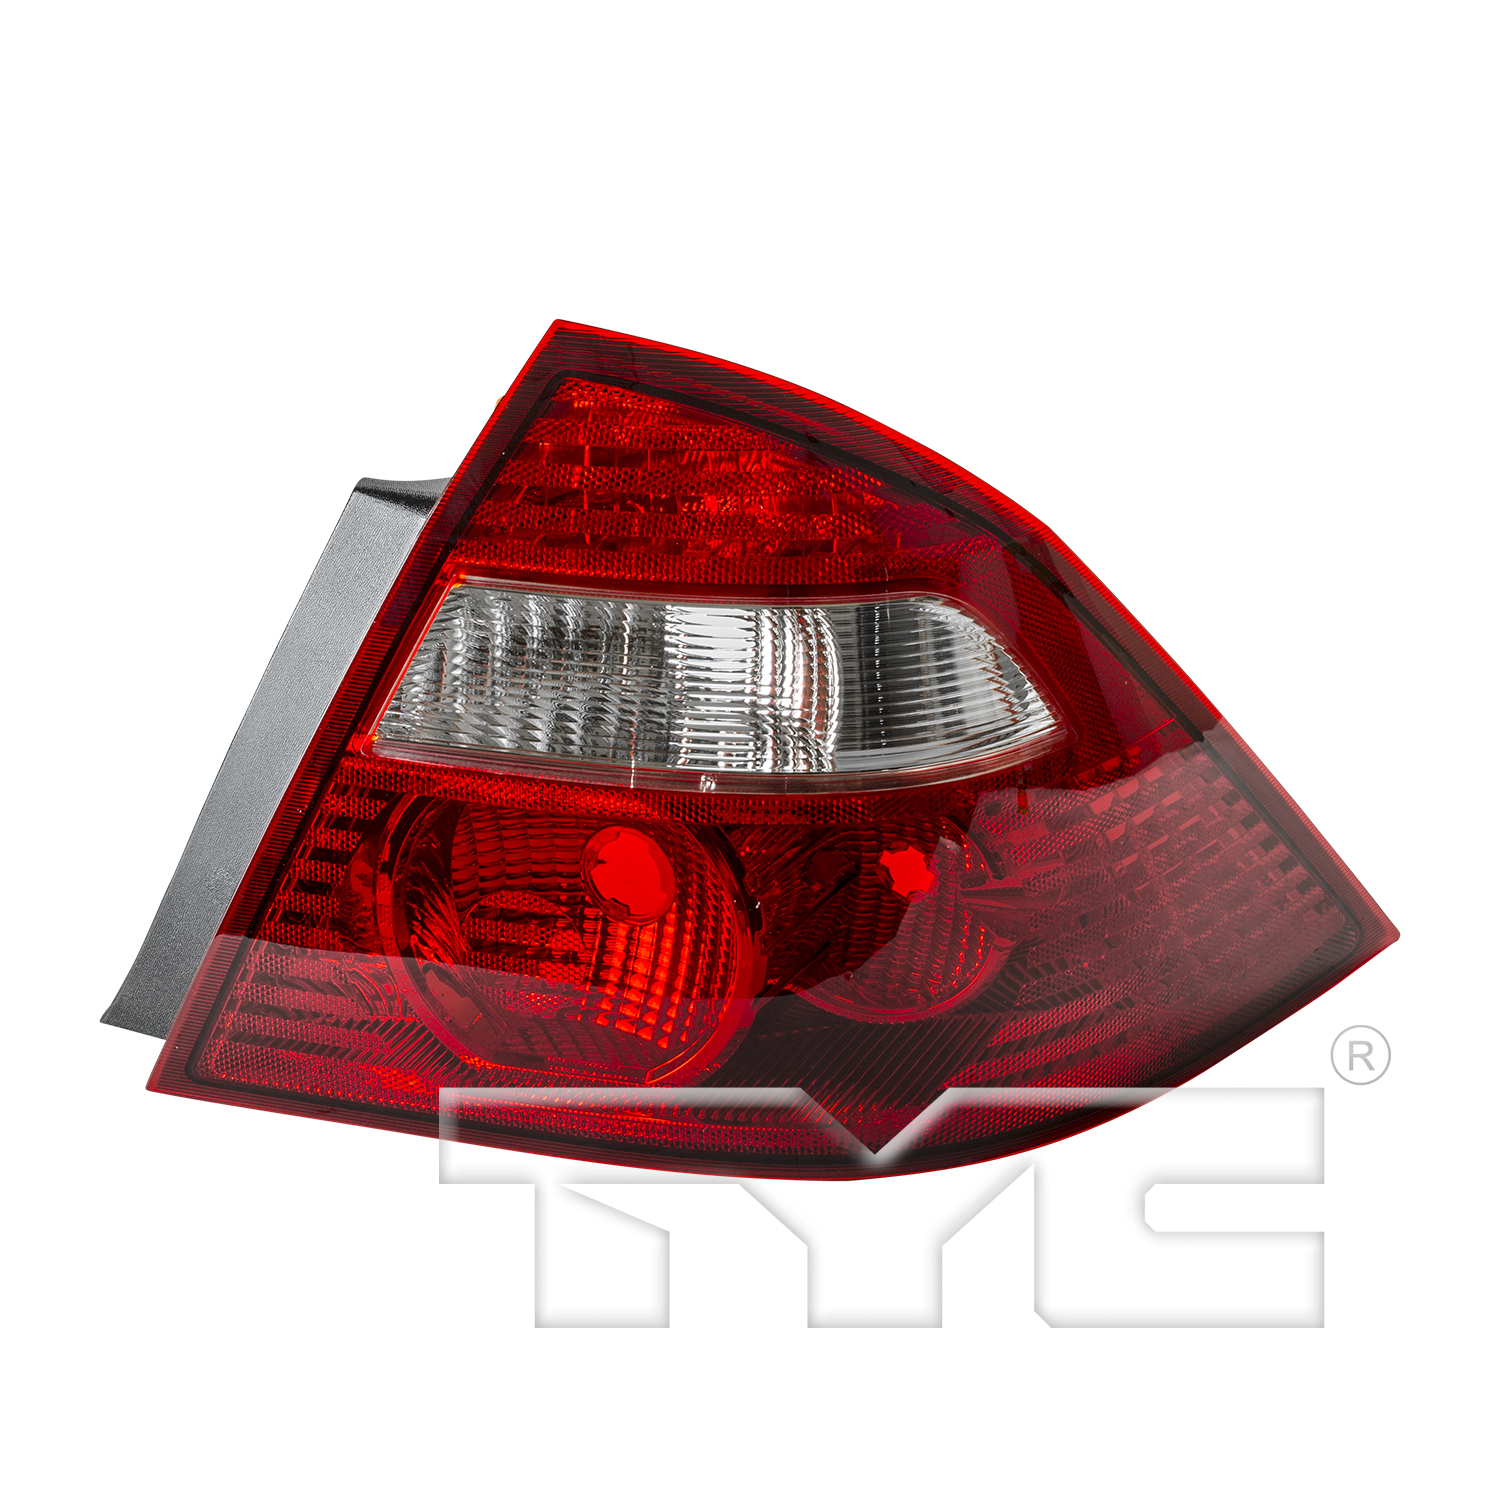 Aftermarket TAILLIGHTS for FORD - FIVE HUNDRED, FIVE HUNDRED,05-05,RT Taillamp lens/housing